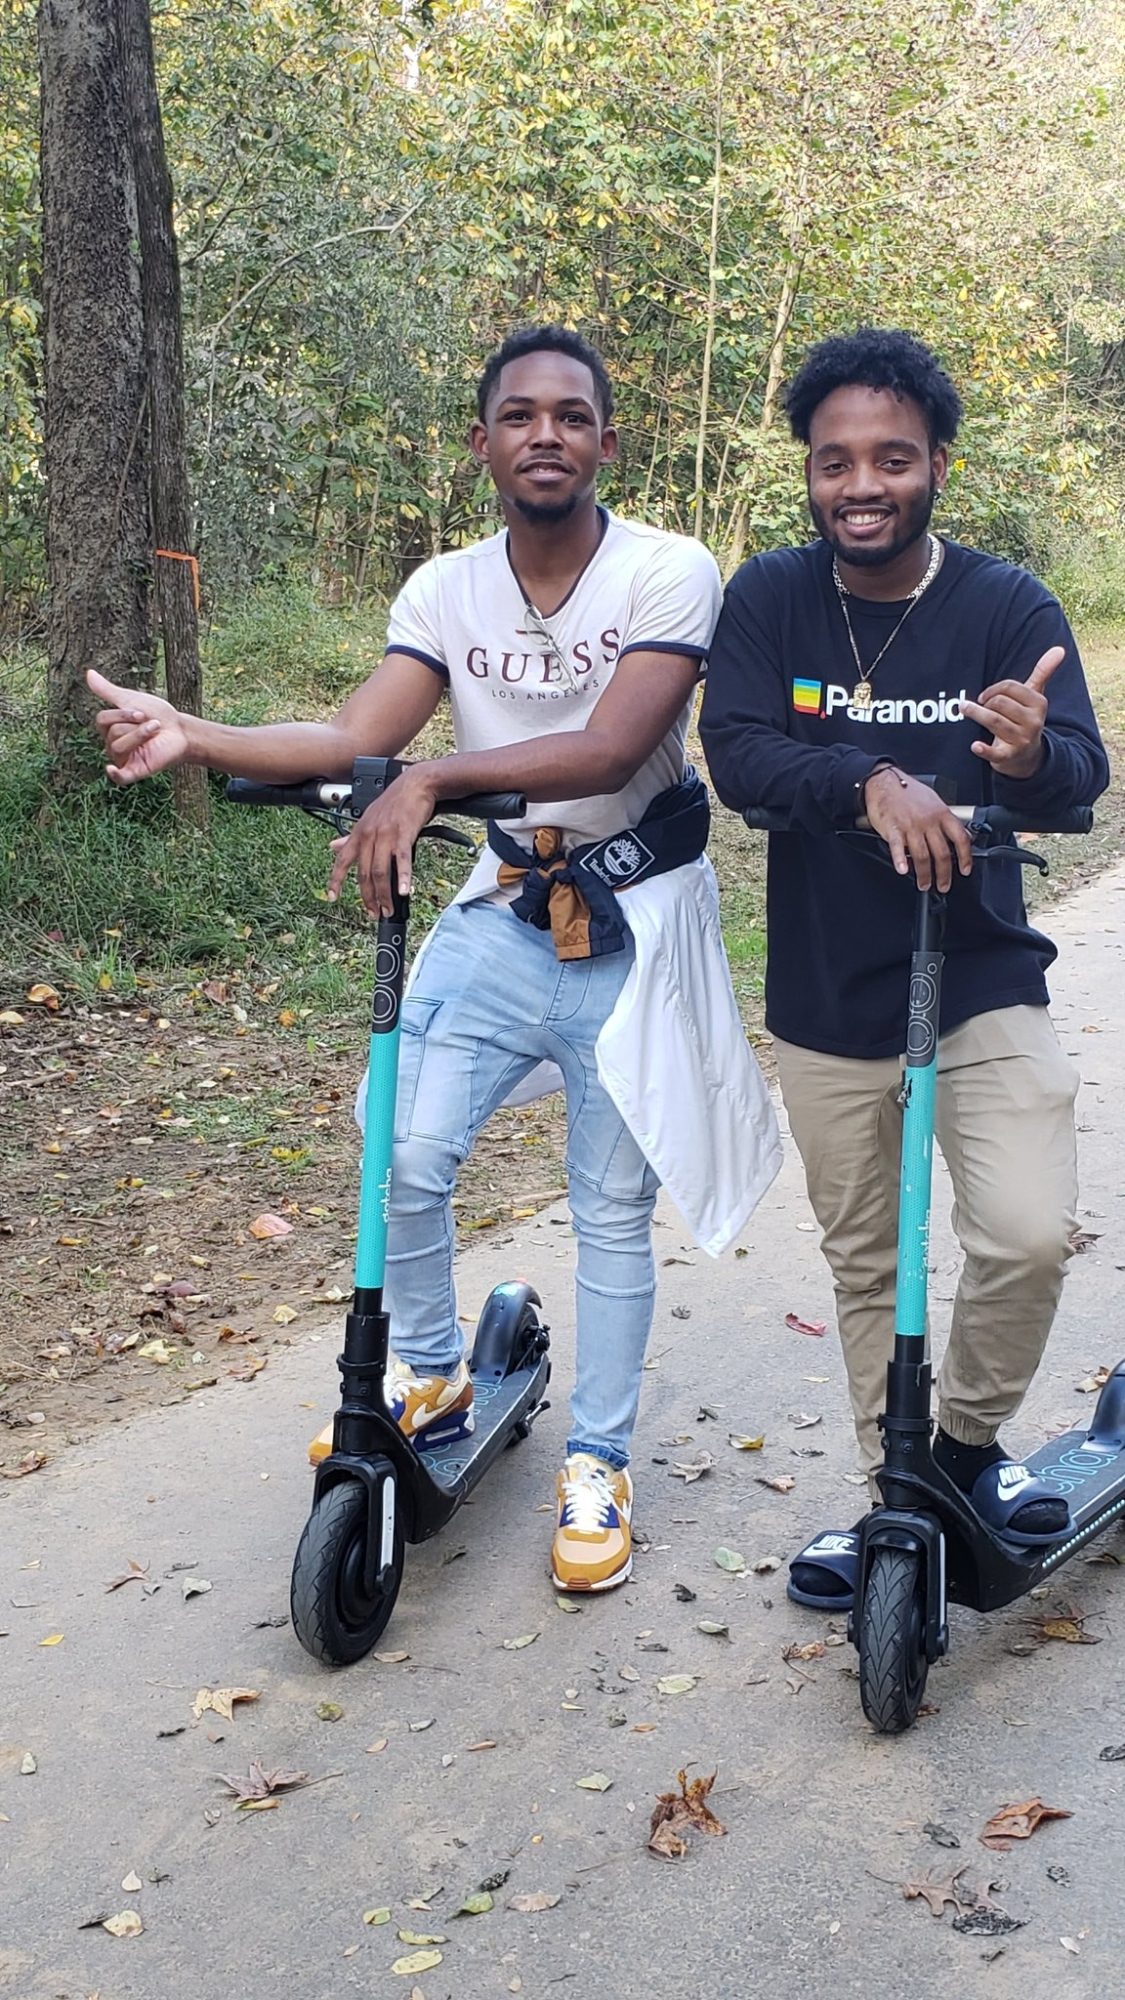 Students ride scooters on greenway